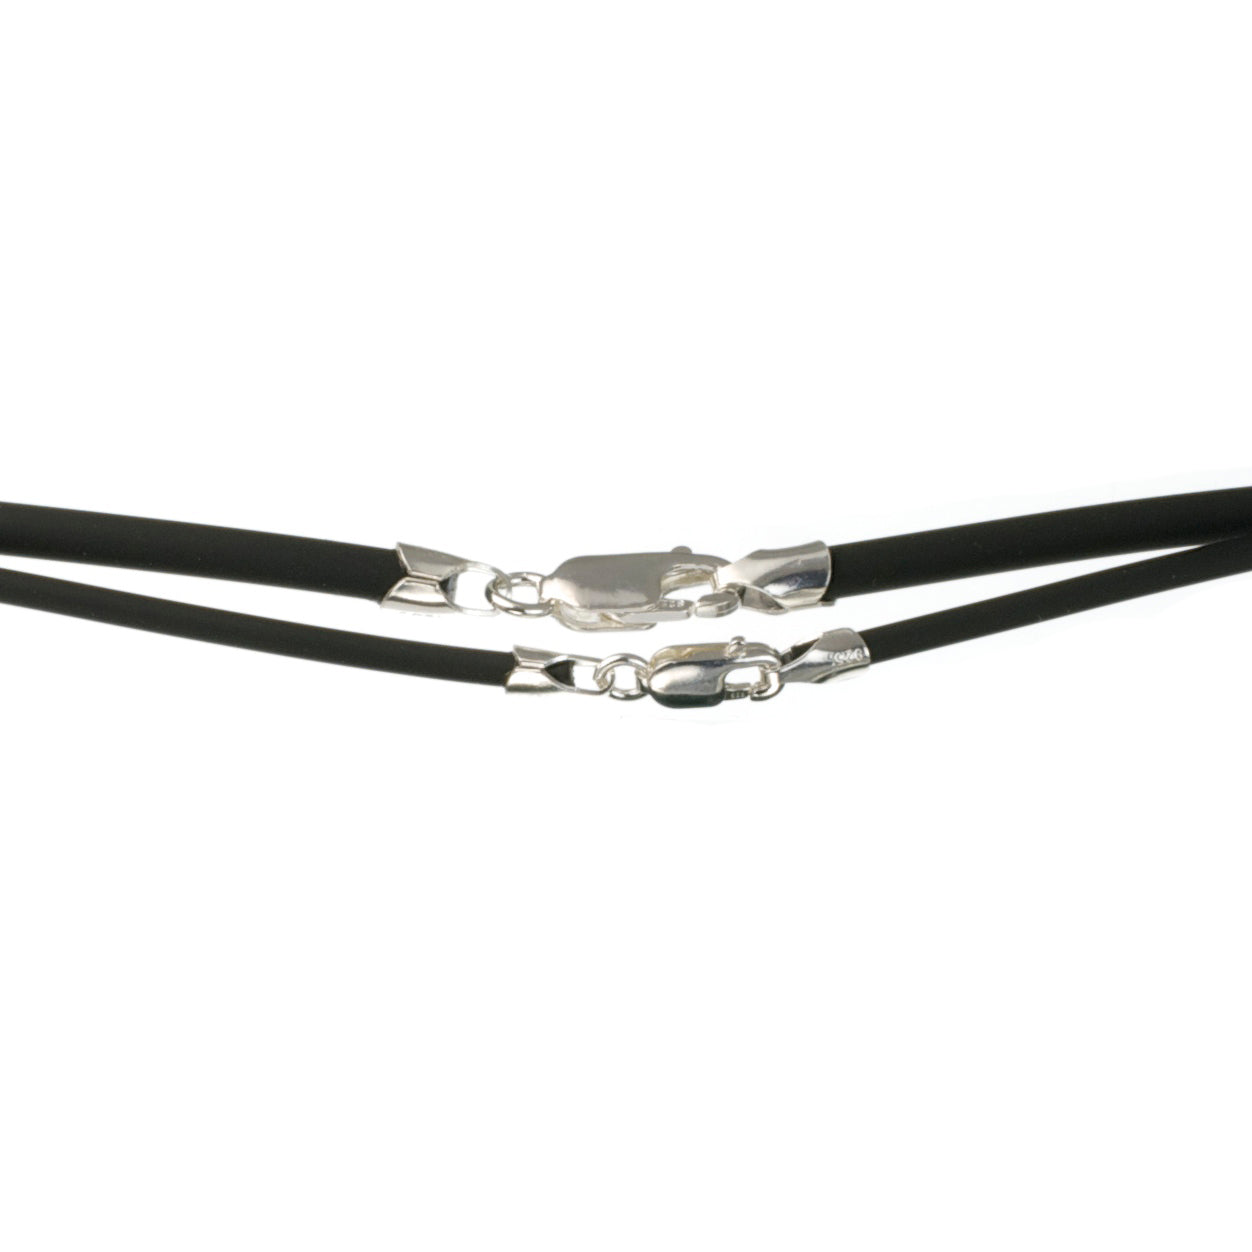 Leather Necklace Cord Clasp  Black Leather Cord Necklace - Black